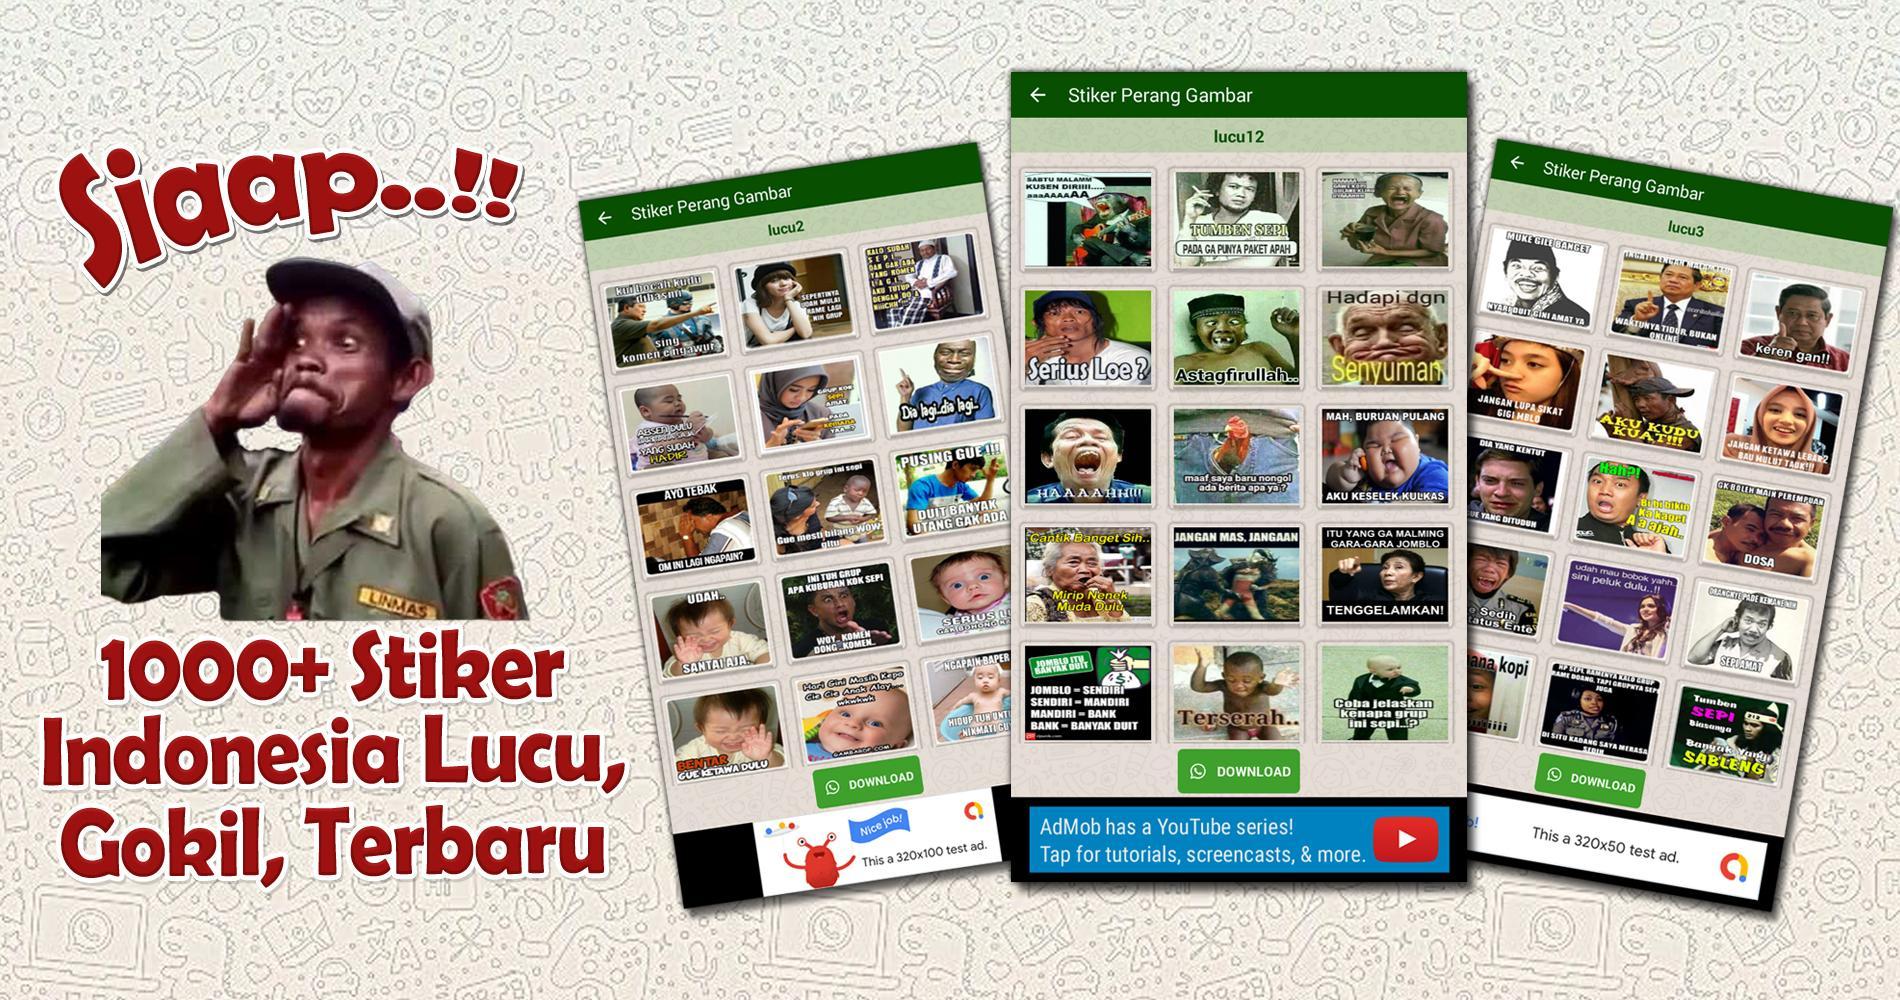 Stiker Meme Indonesia Lucu Wastickersapps Stickers For Android Apk Download